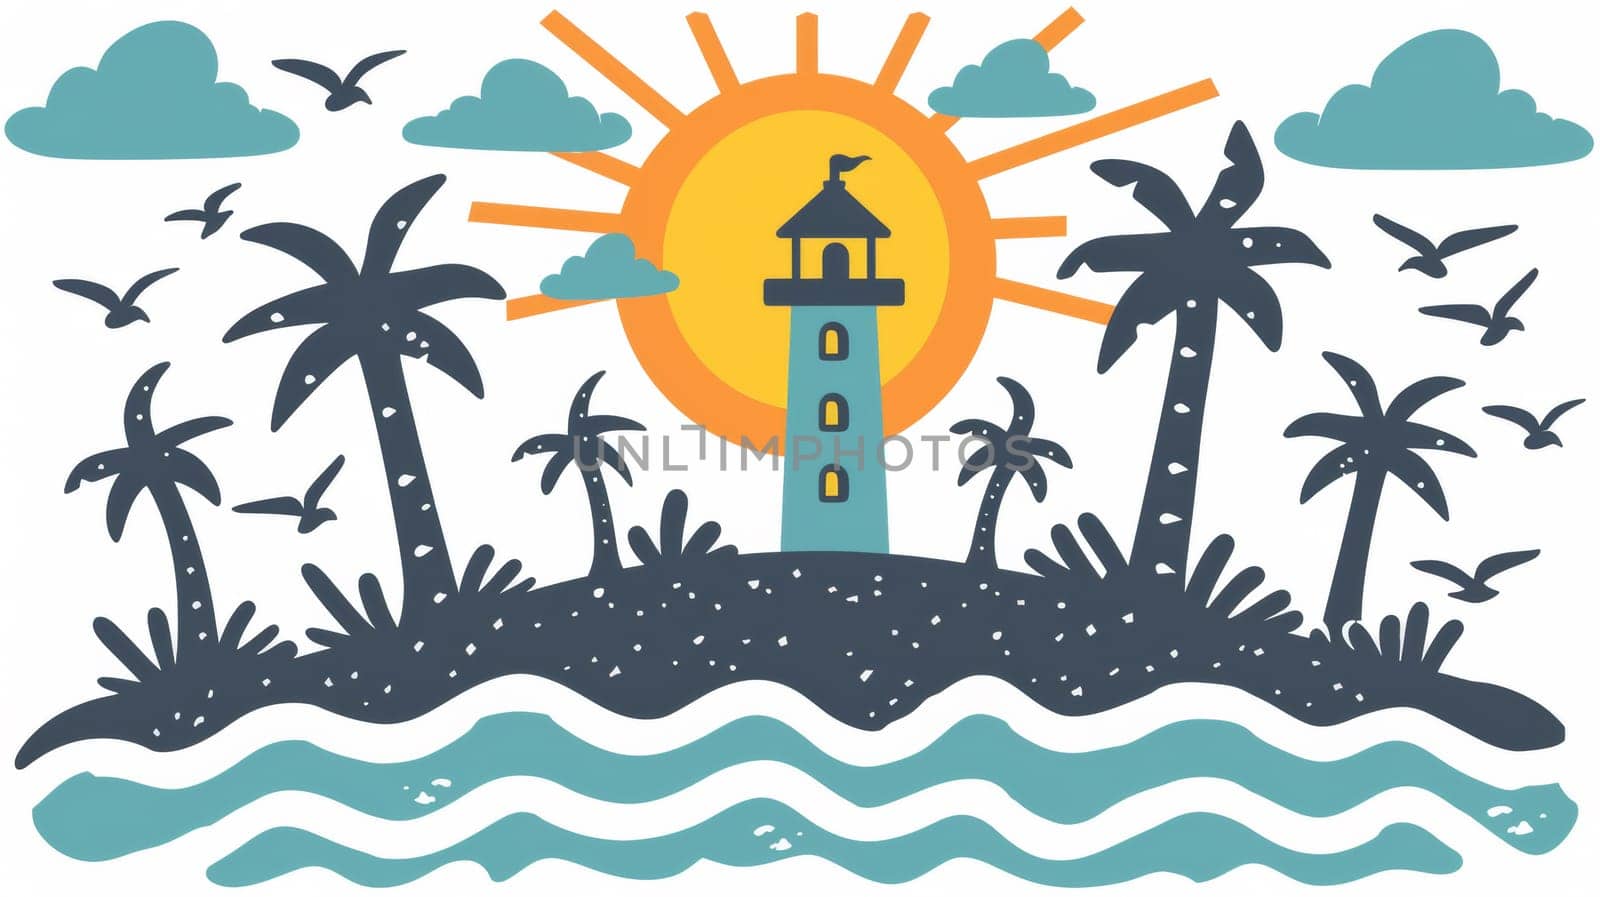 A lighthouse and palm trees on a beach with birds flying around